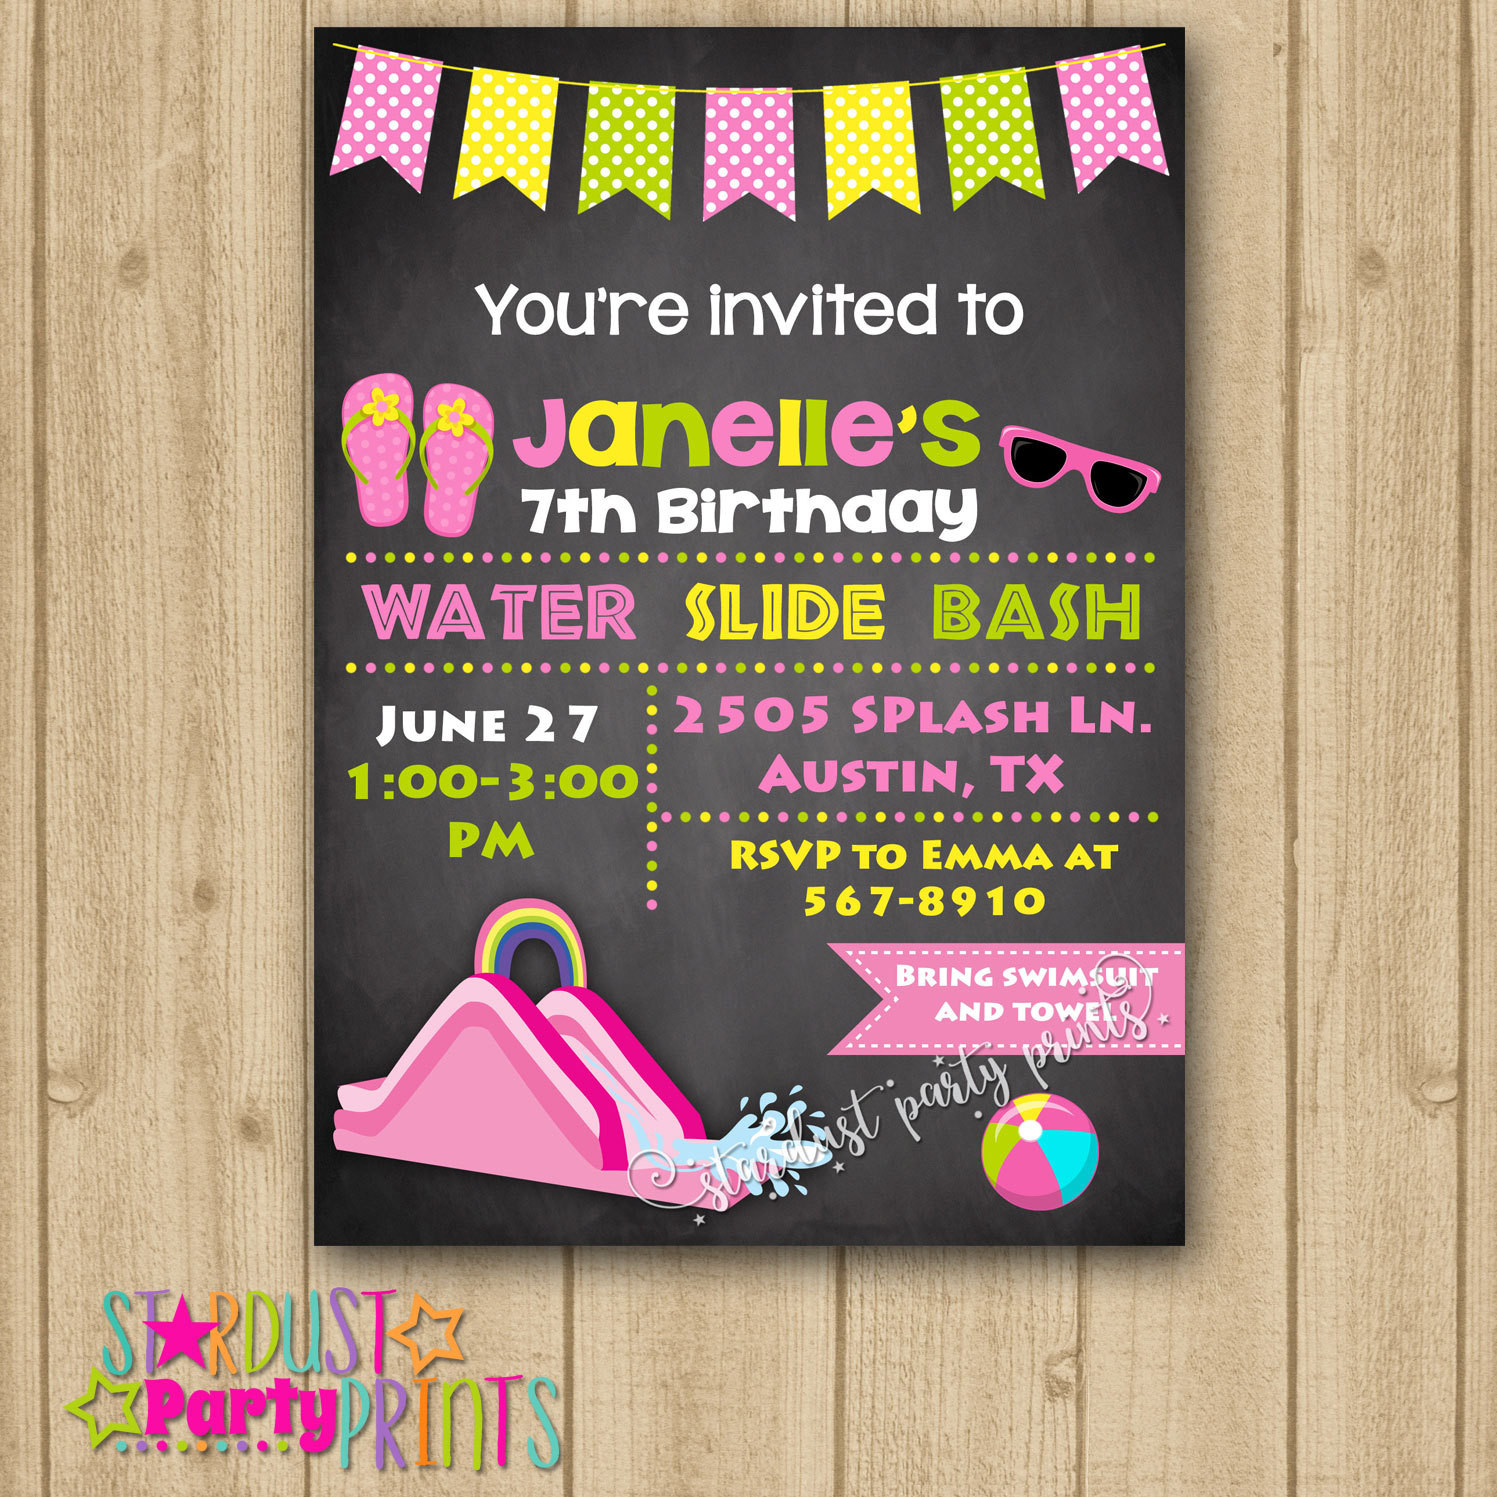 Water Slide Birthday Party Invitations
 Water Slide Invitation Water Slide Birthday Invitation Water